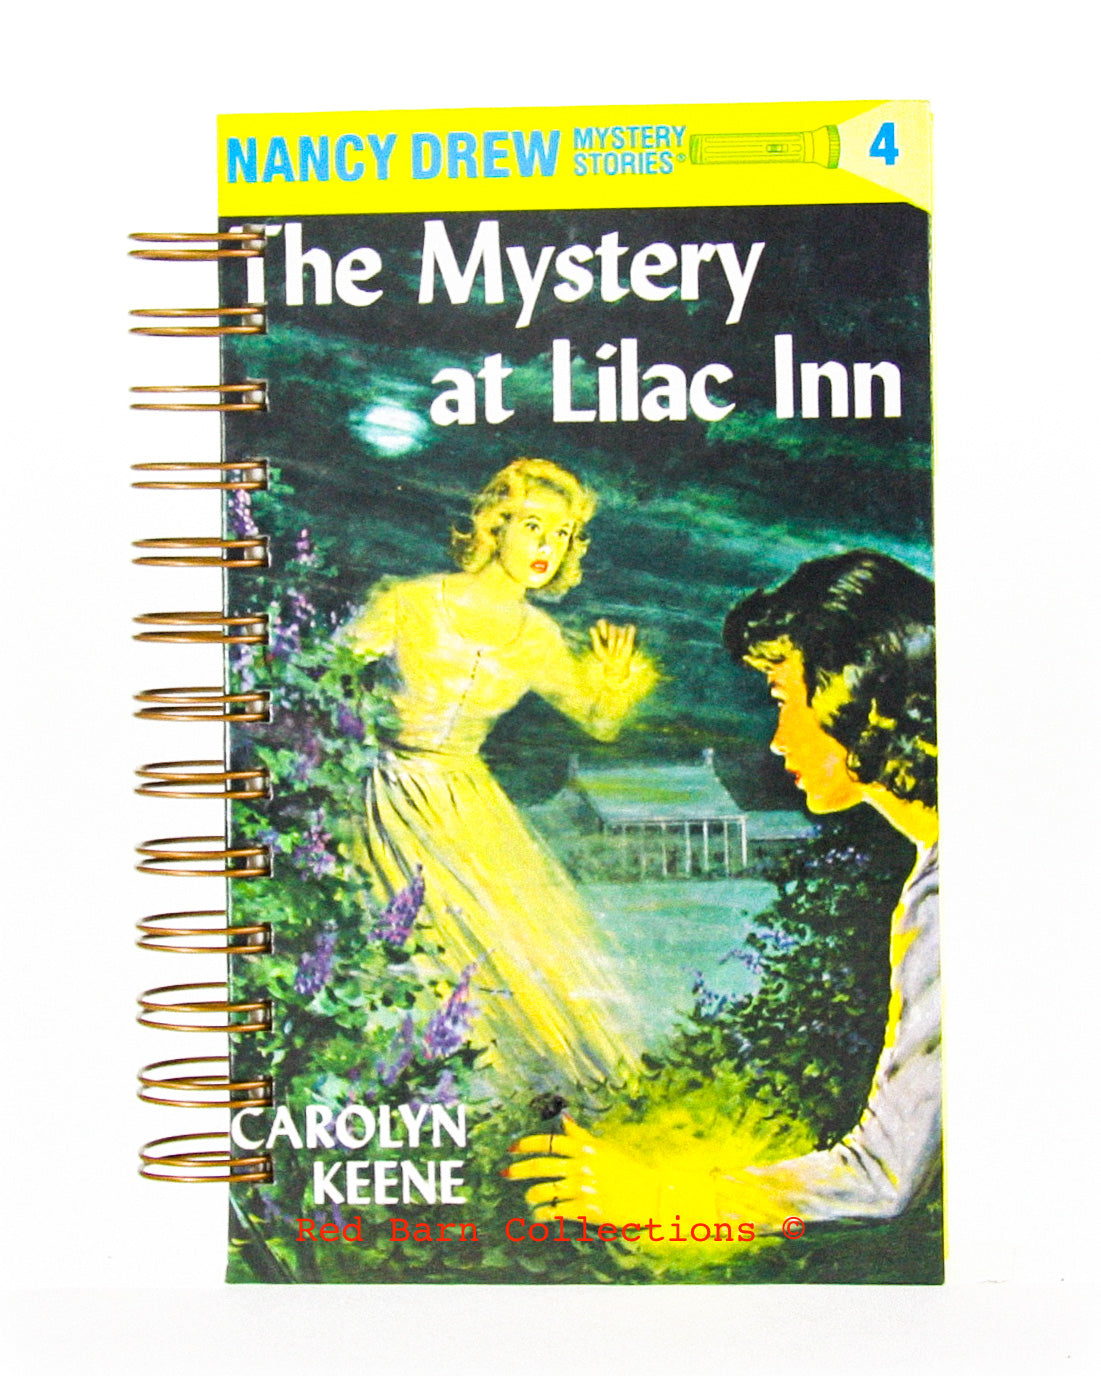 Nancy Drew #04 - The Mystery at Lilac Inn-Red Barn Collections